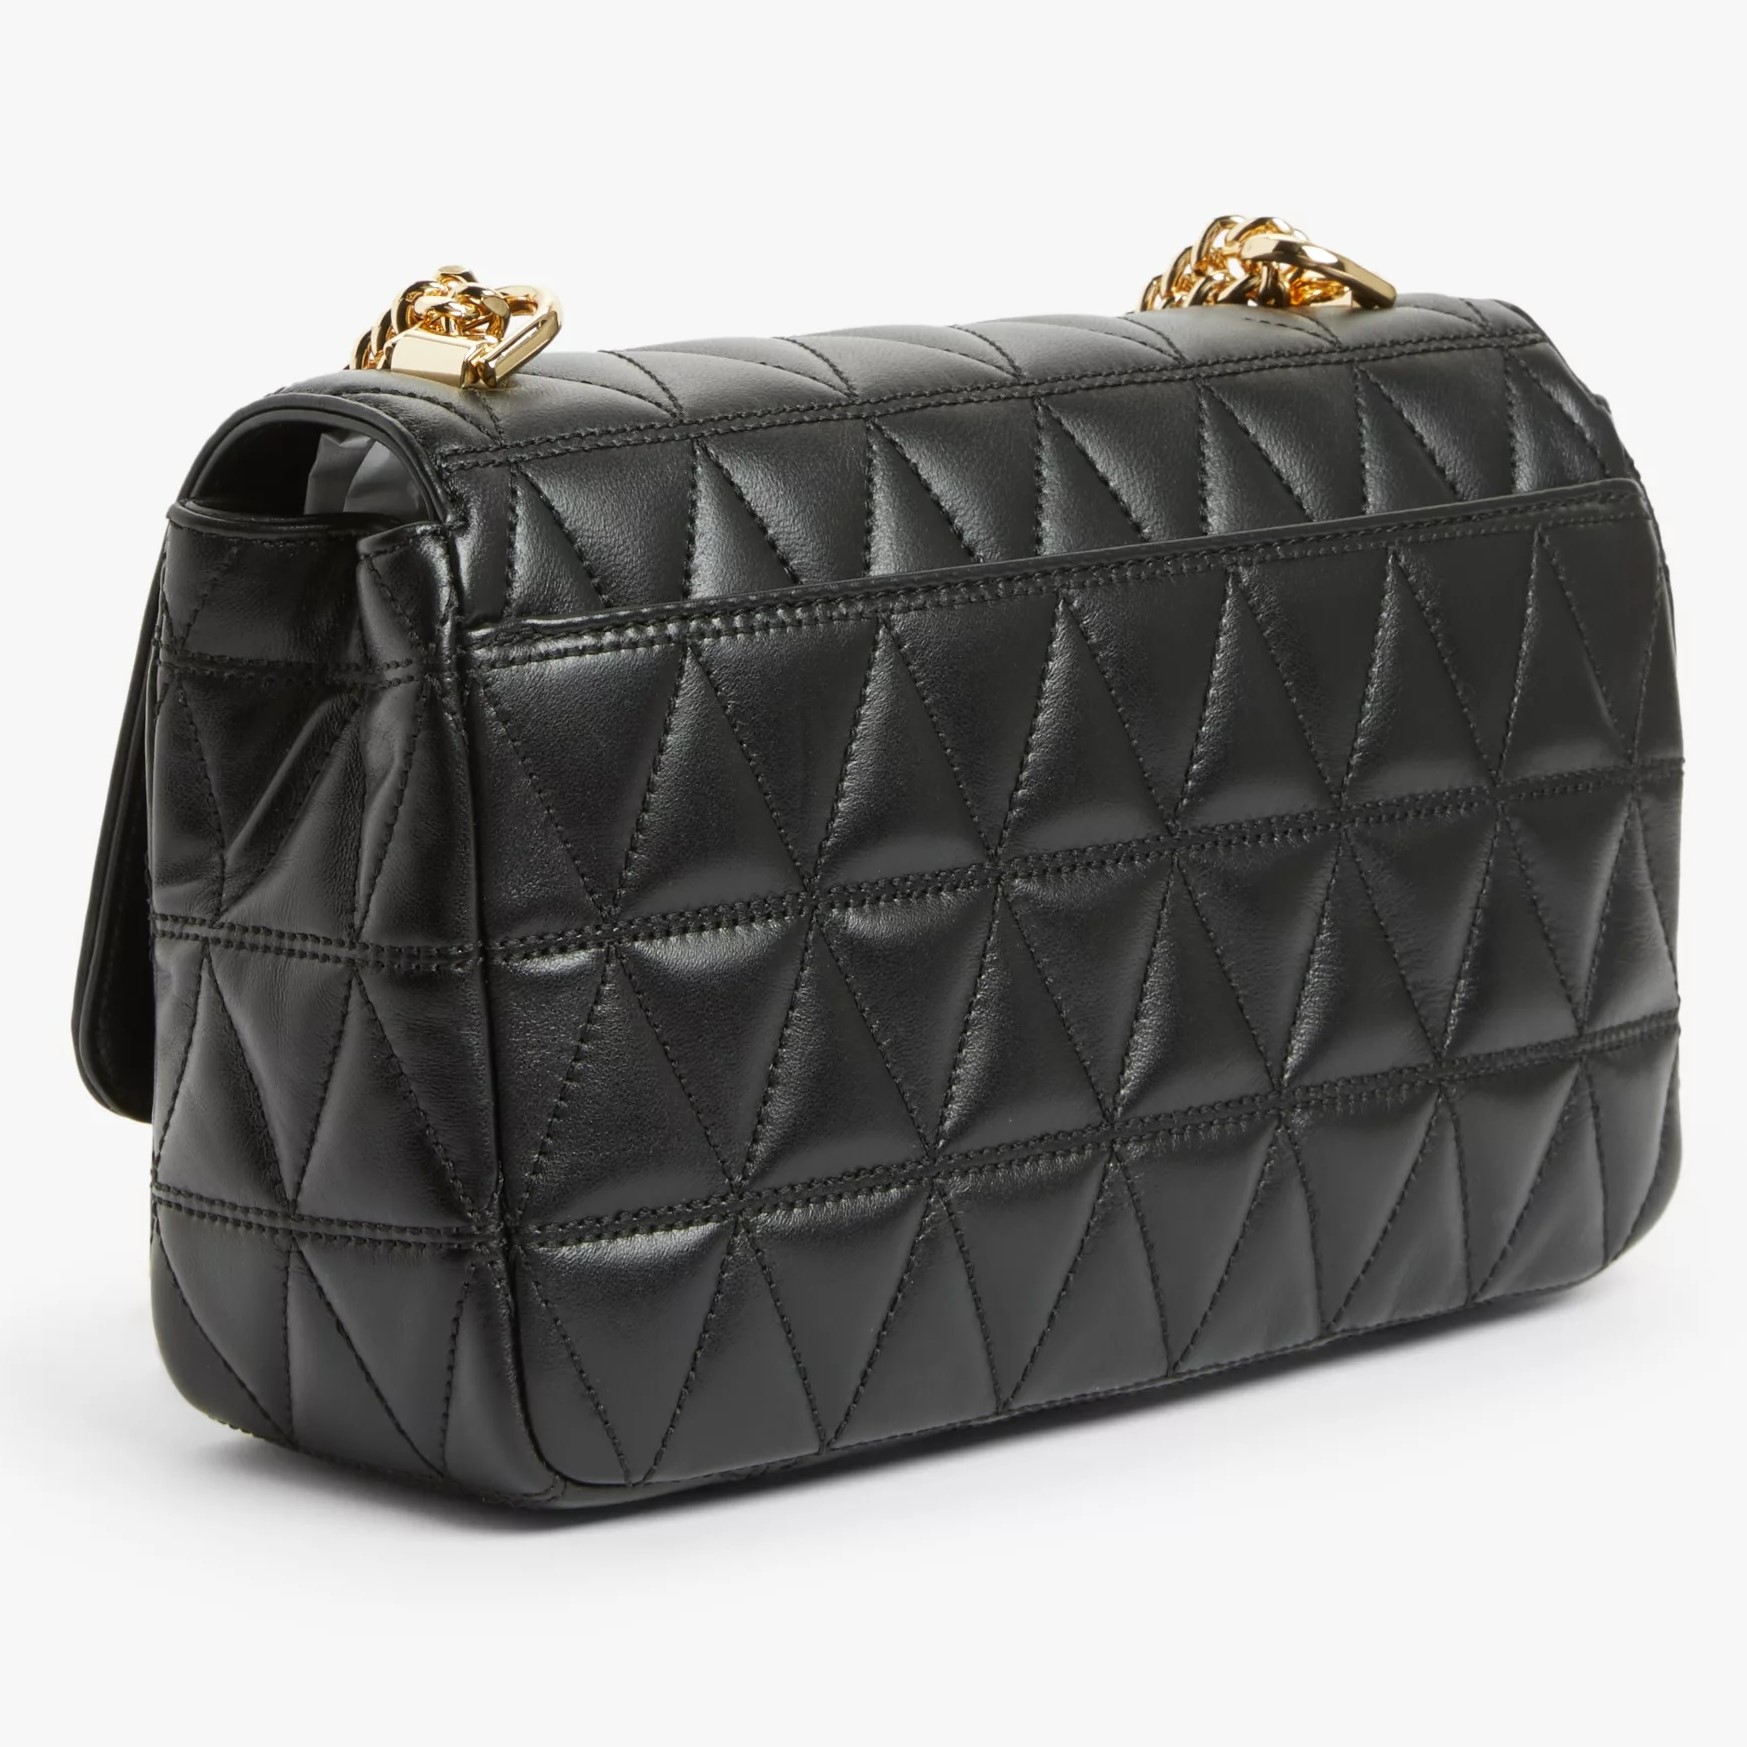 TÚI XÁCH NỮ MICHAEL KORS SLOAN LARGE QUILTED LEATHER SHOULDER BAG 11